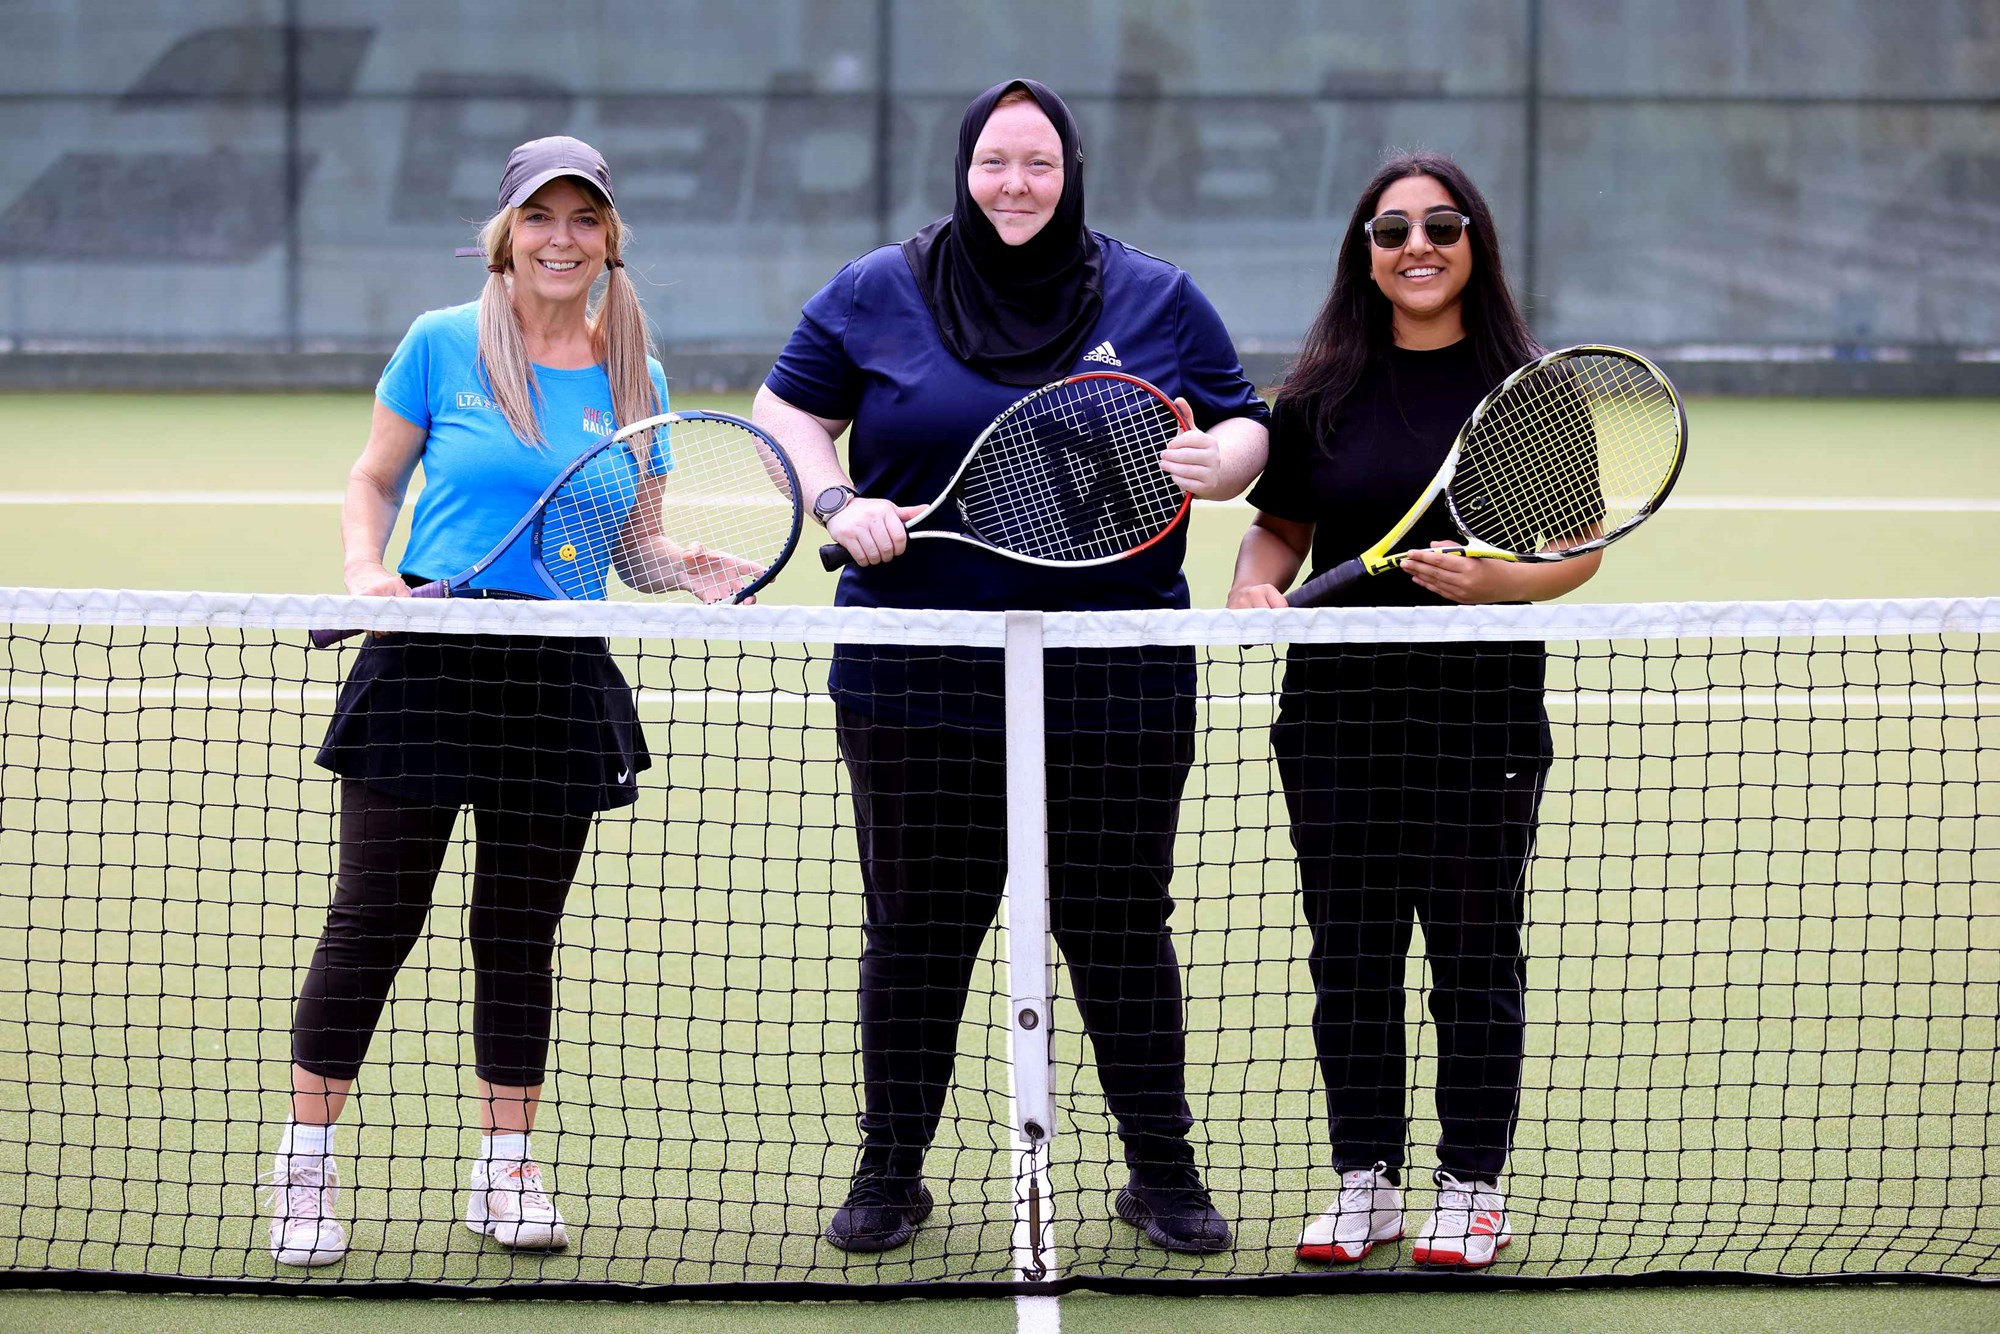 Carolle Forde Garcia (L), Nalette Tucker, and Iman Mahmood (R) pictured stood behind the net with tennis rackets in hand.